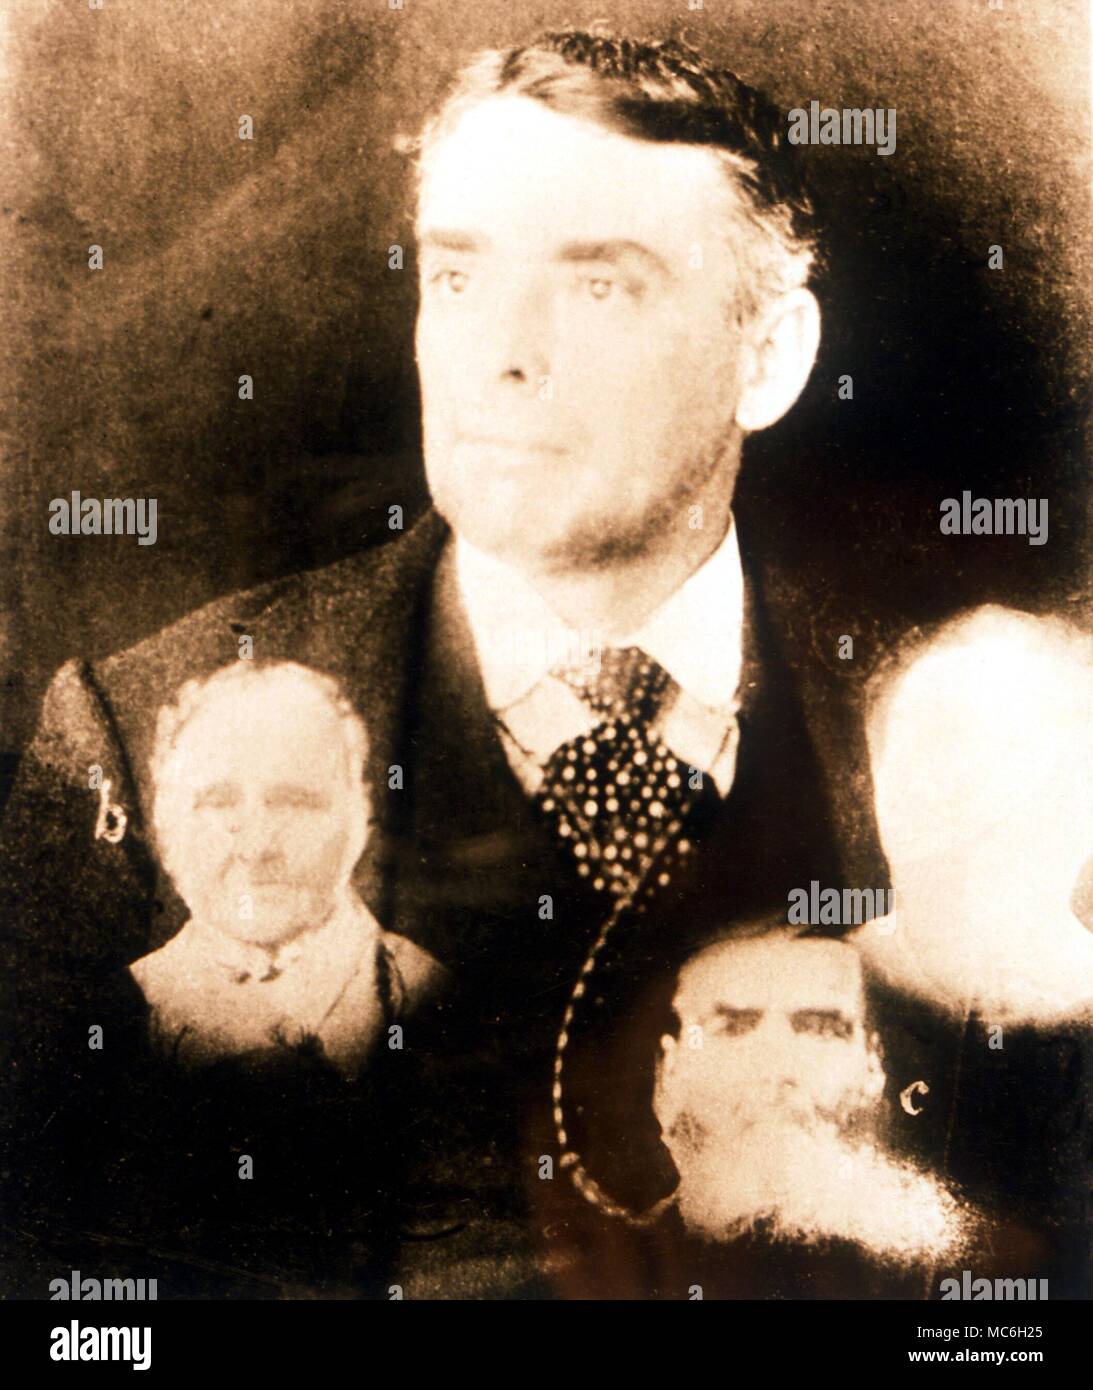 GHOSTS - WYLLIE PICTURE Photograph of living subject with several ghostly 'extras', taken by American psychic photographer Edward Wyllie, C. 1890 Stock Photo